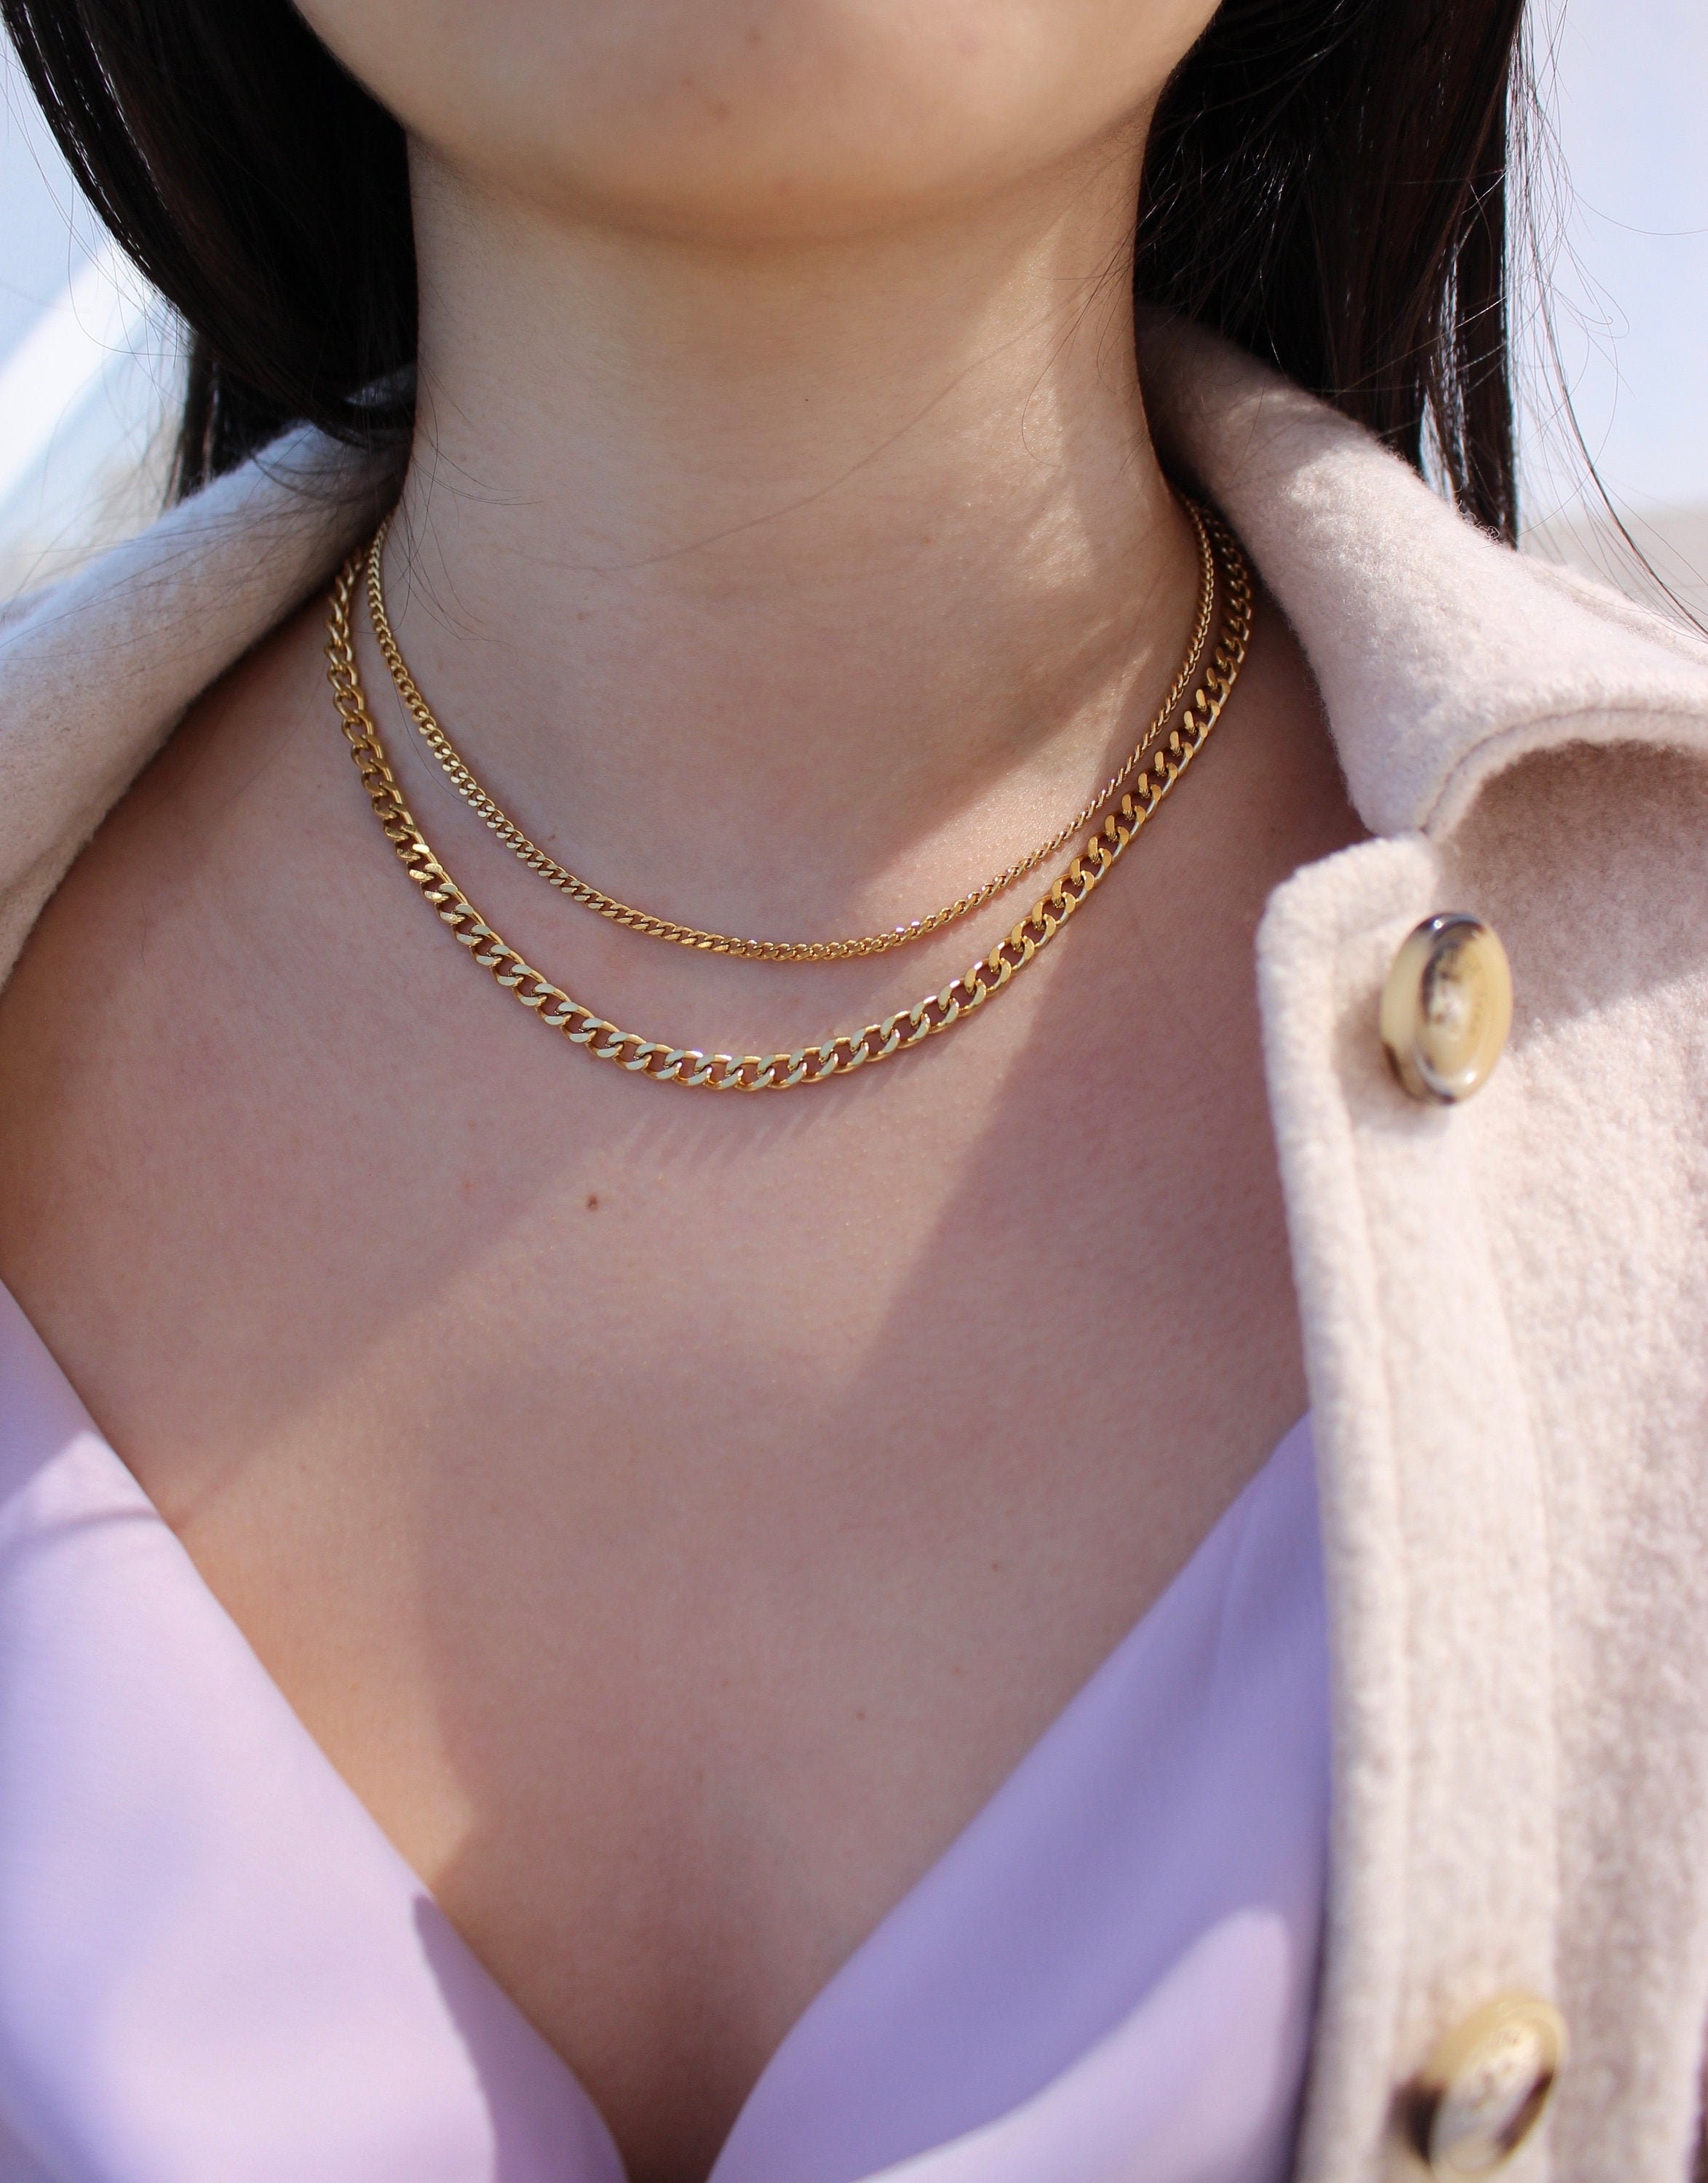 Gold Chain Choker Women, Thick Heavy Solid 316L Stainless Steel Gold Chain  Necklace, Miami Cuban Link Chain Choker, Gold Chunky Chain Collar 